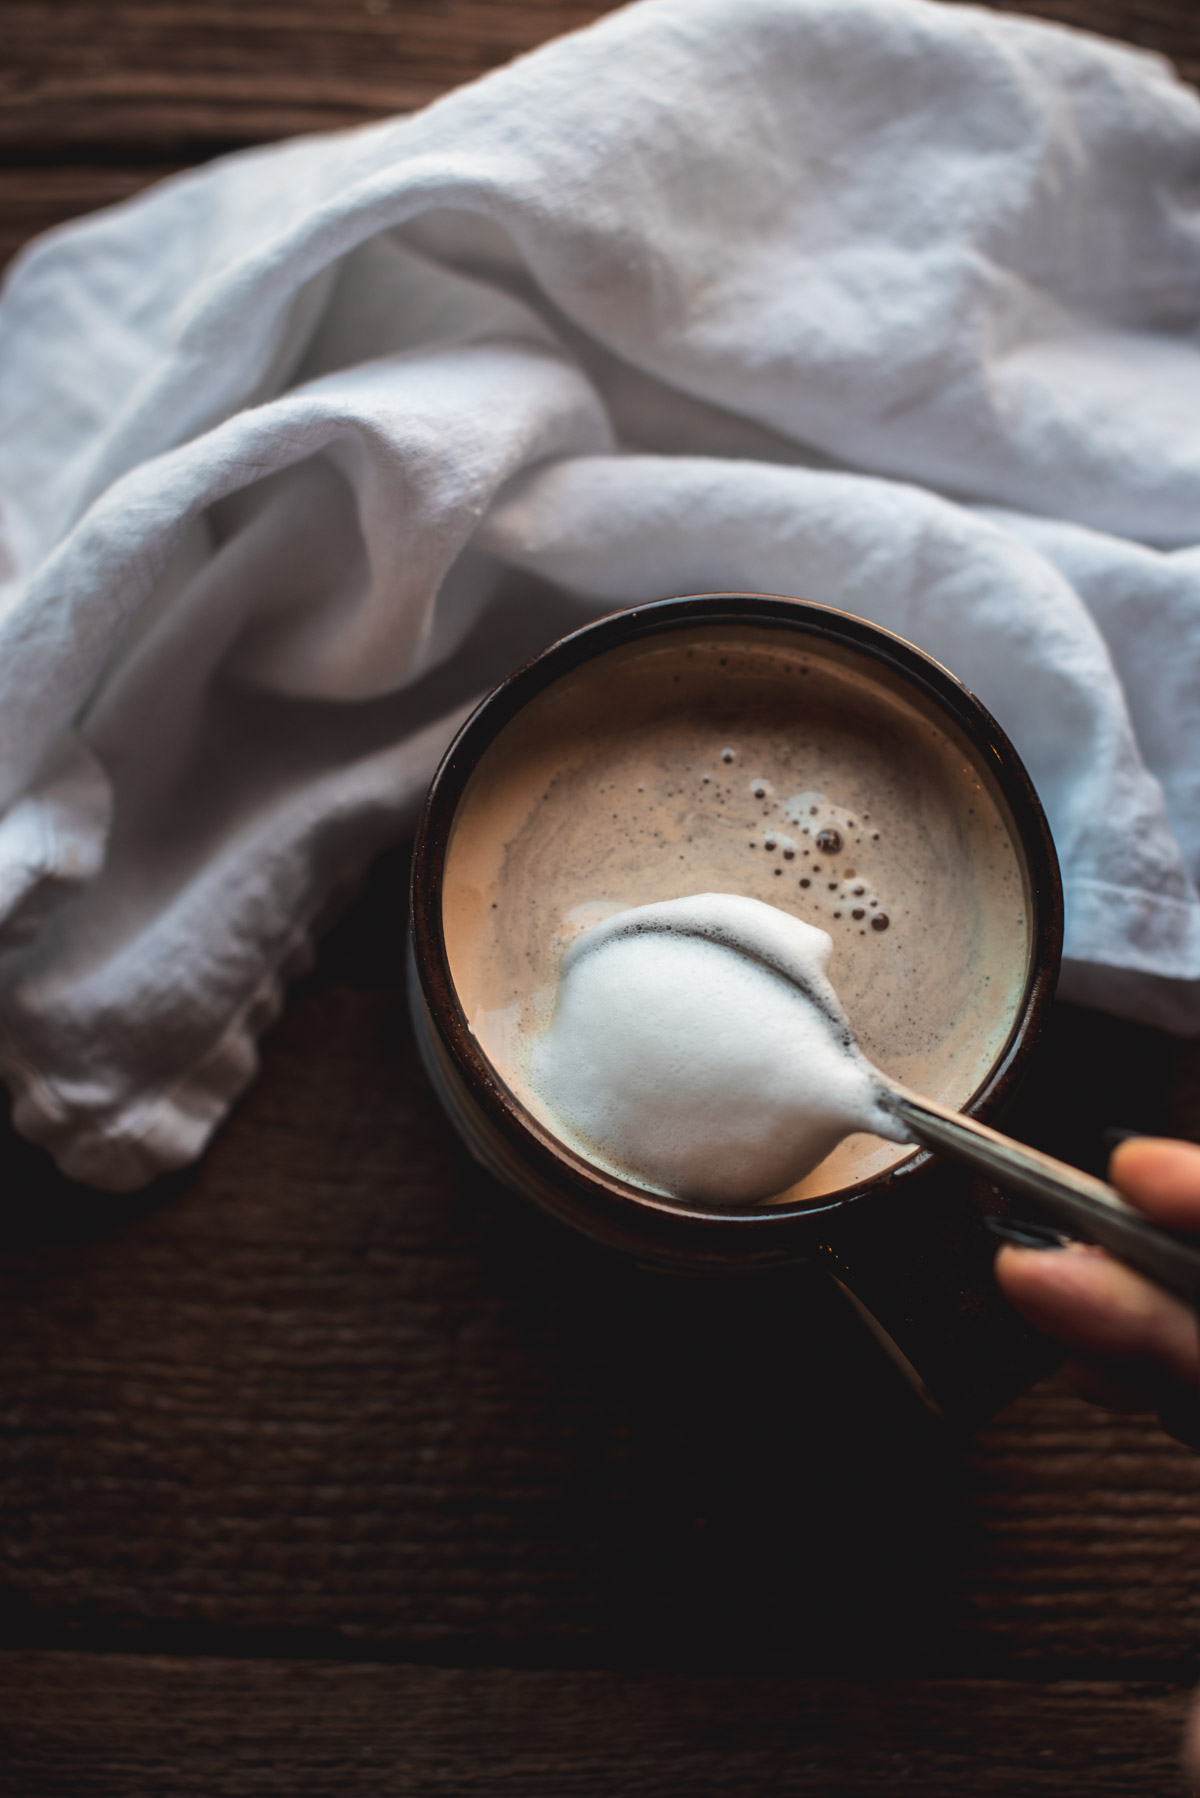 Close up image of spoon ladling milk foam on top of a latte inside a brown mug.  The mug is set on top of a wooden background with a white linen napkin.